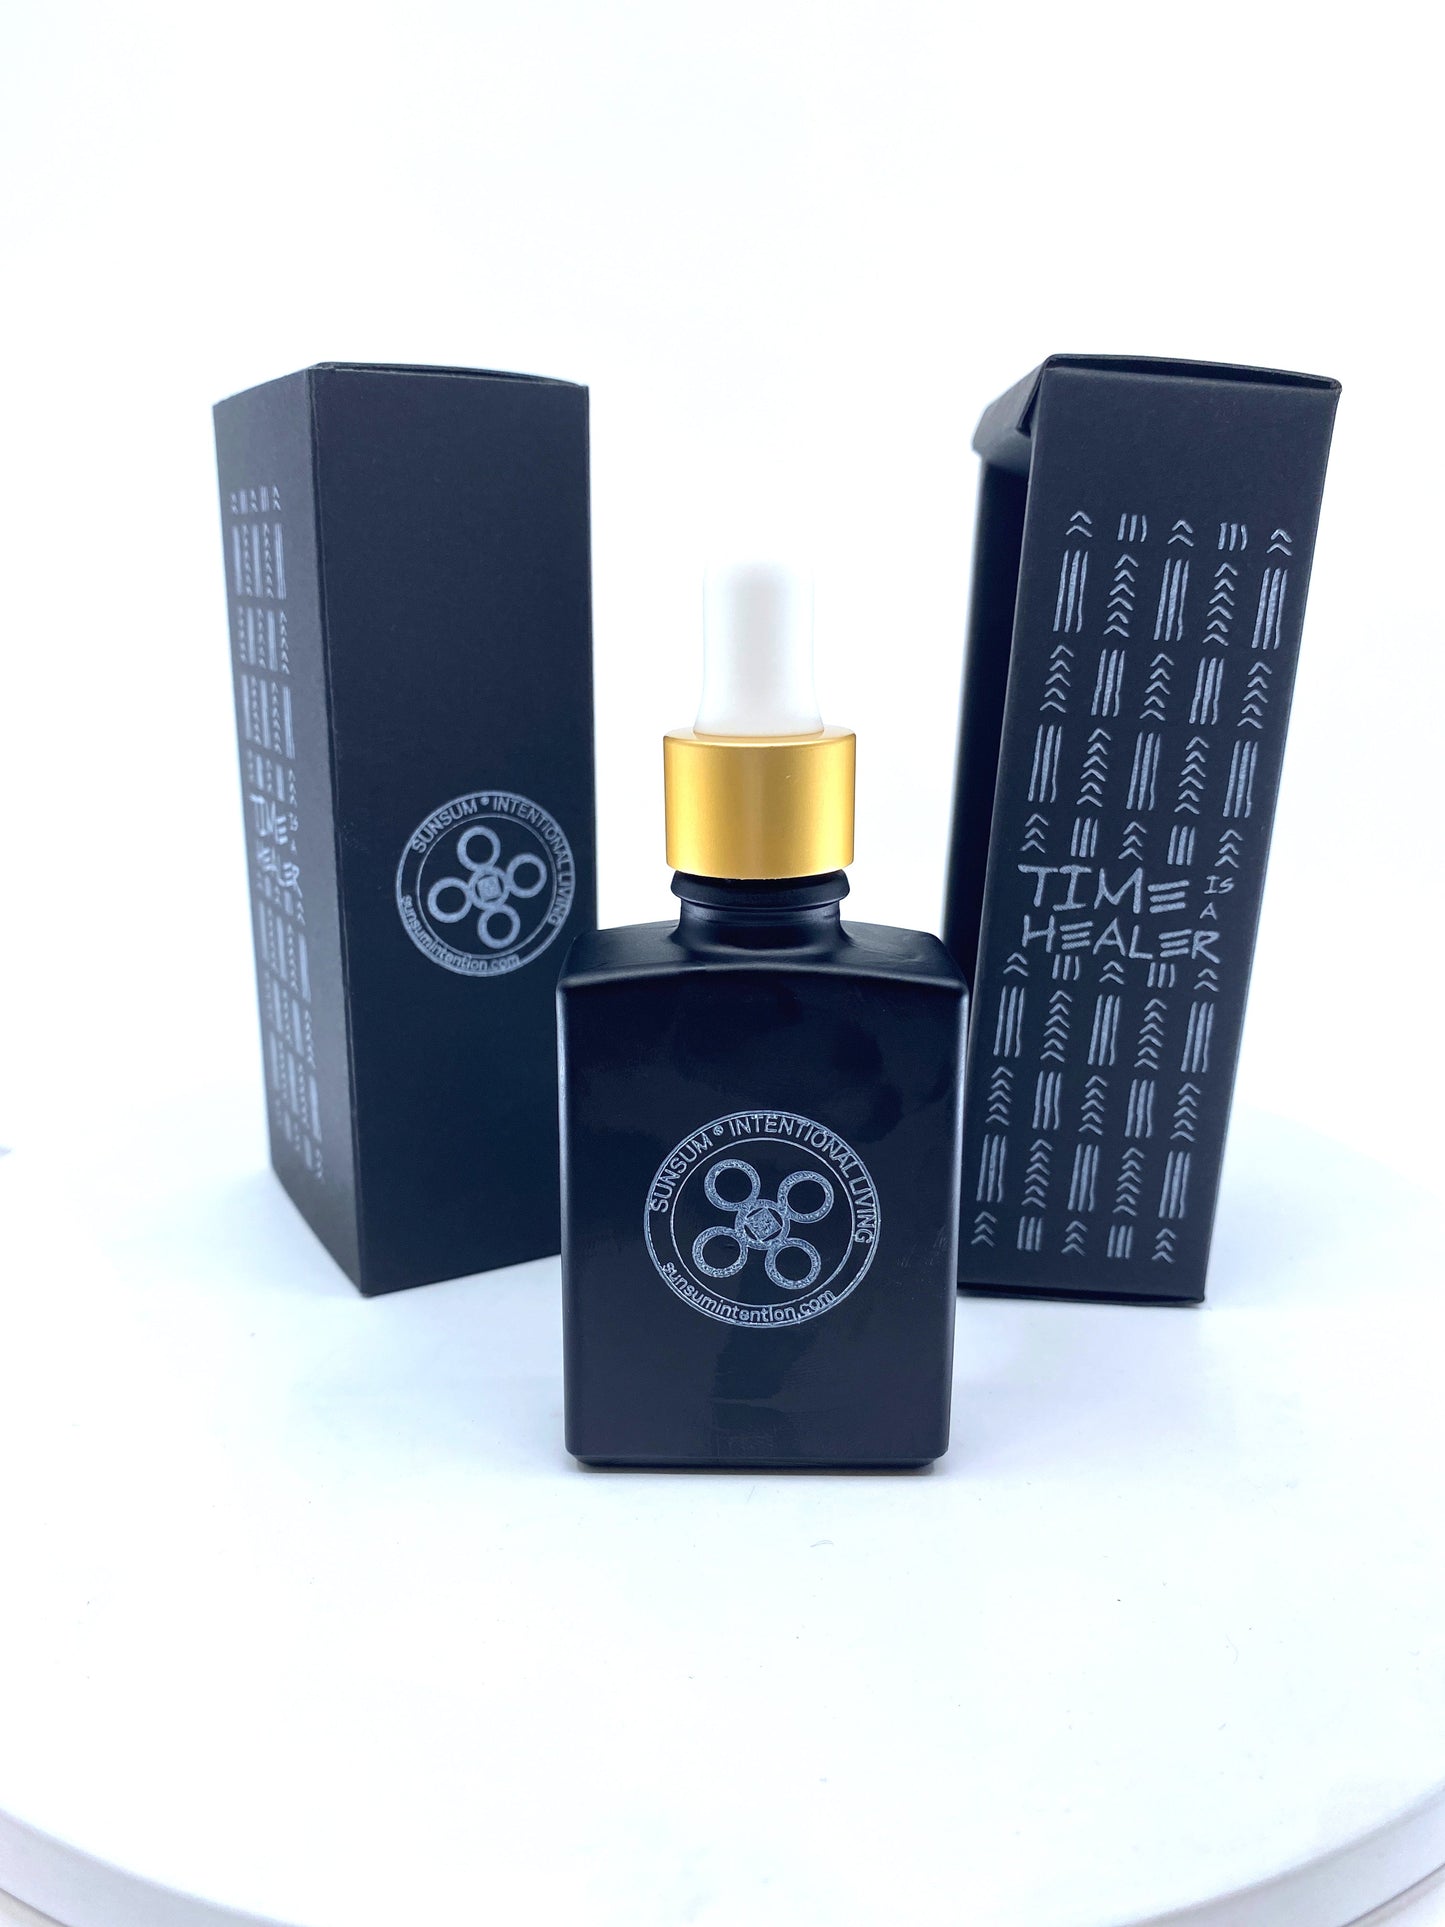 Time Is a Healer, Personal Fragrance, 30 ml